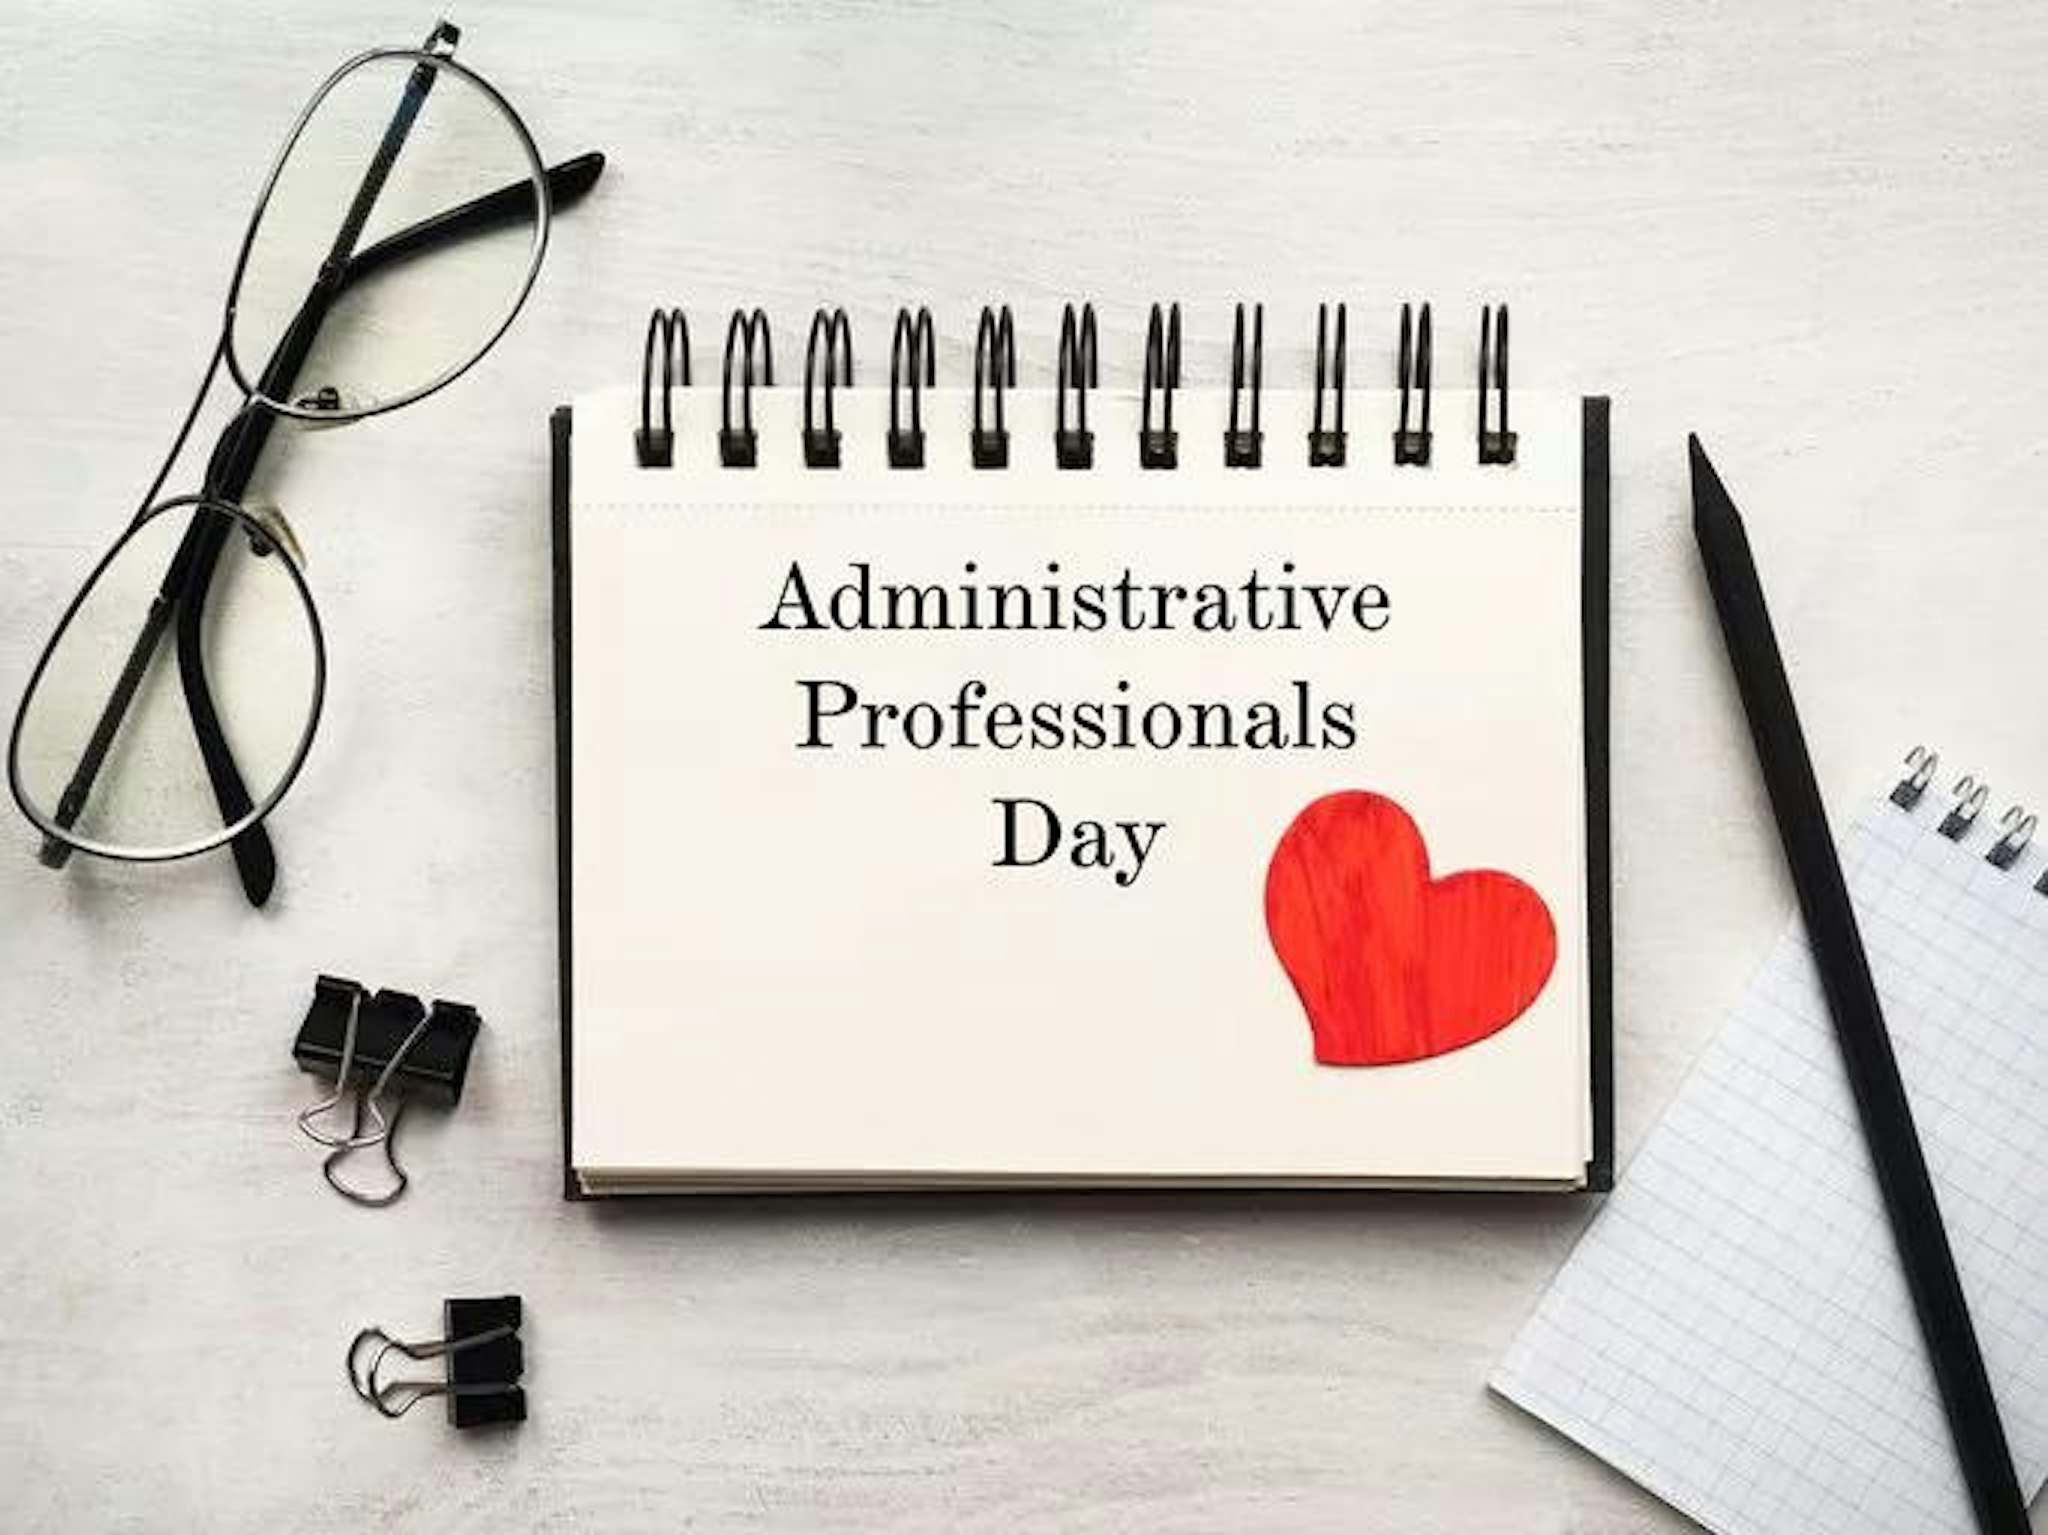 Calendar showing administrative professionals day